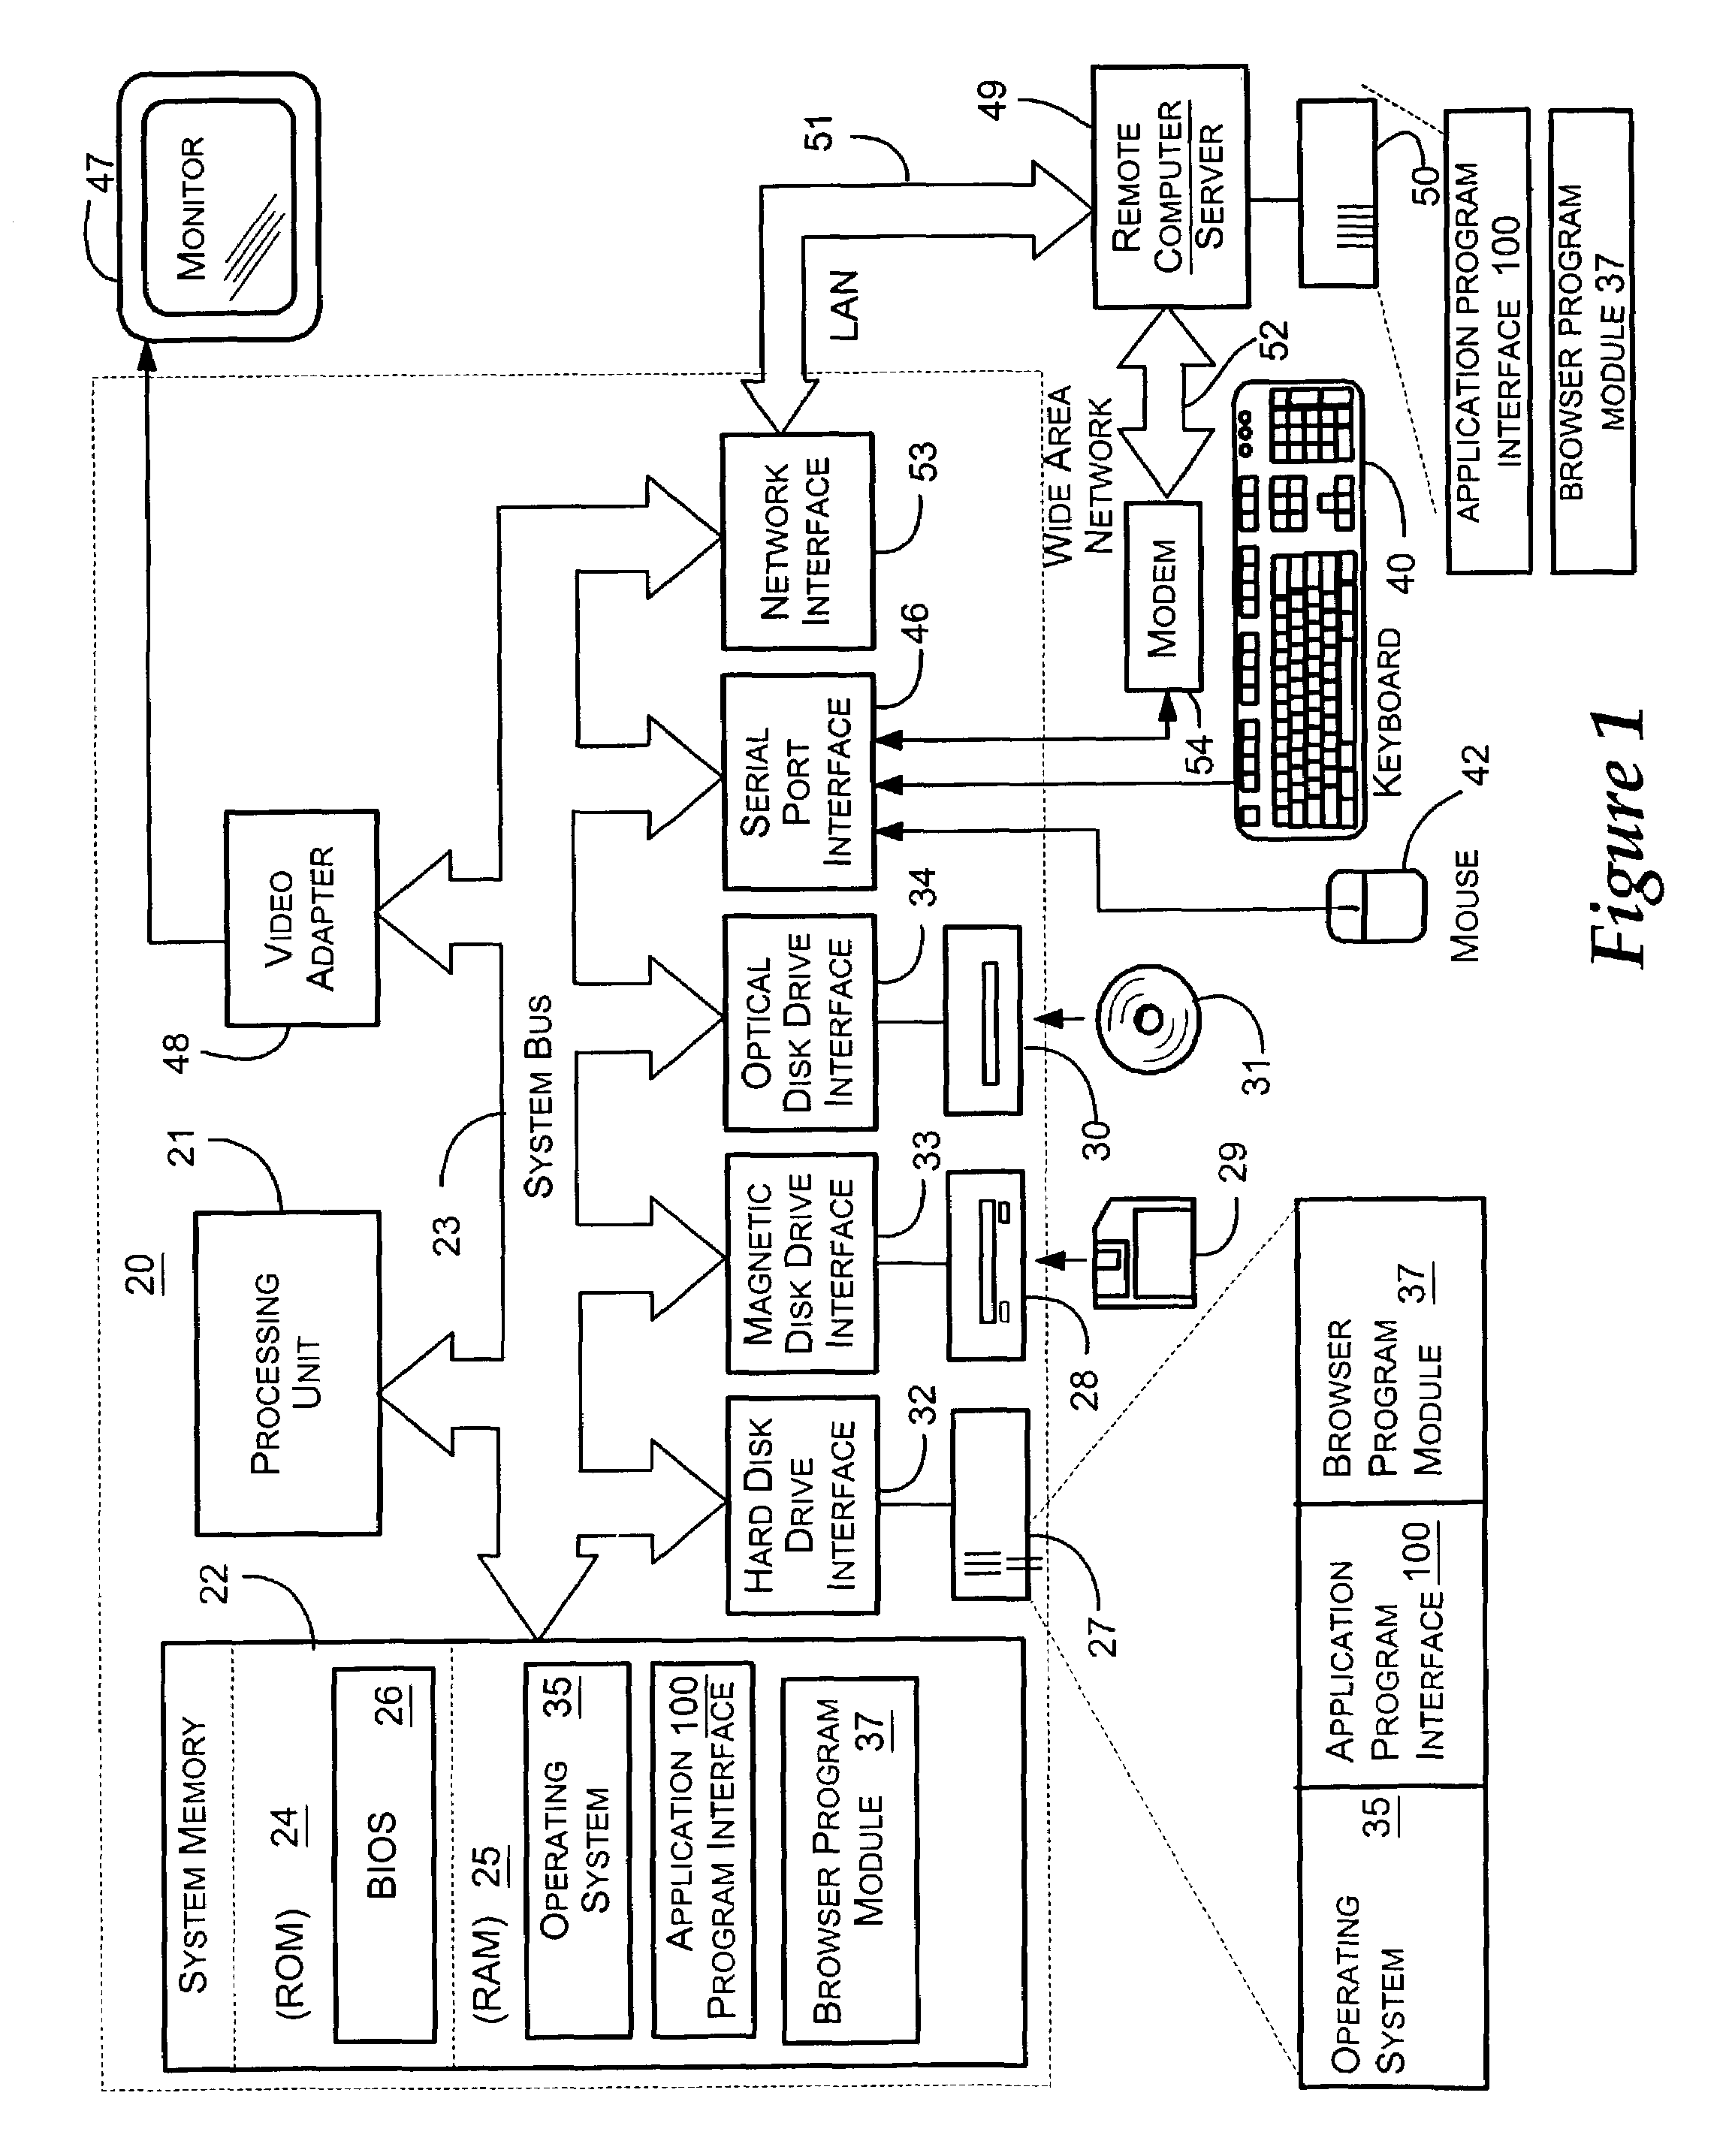 Method, system, and computer-readable medium for filtering harmful HTML in an electronic document